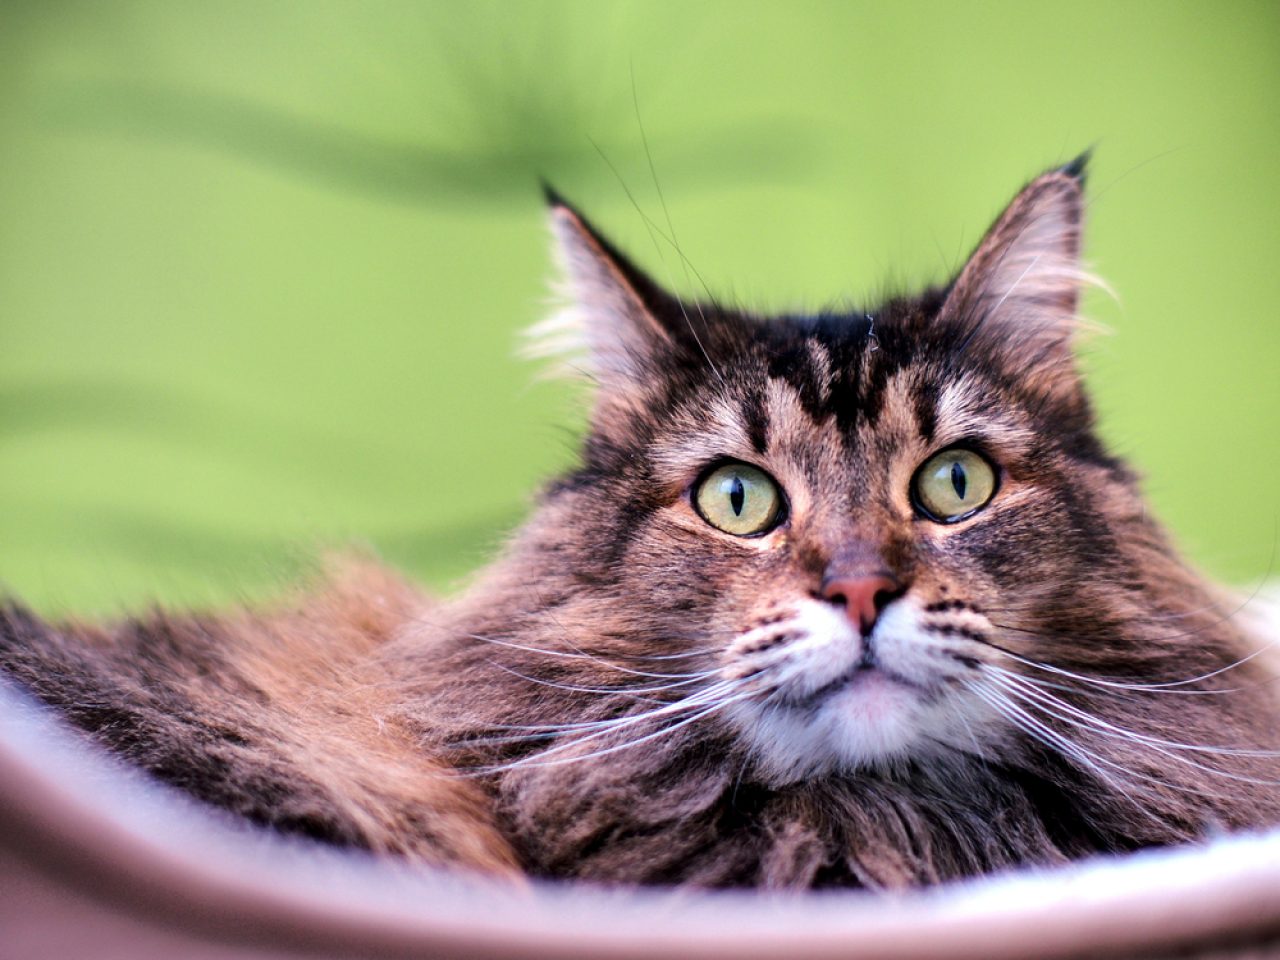 Savannah Maine Coon Mix: Are You Looking For A Giant?